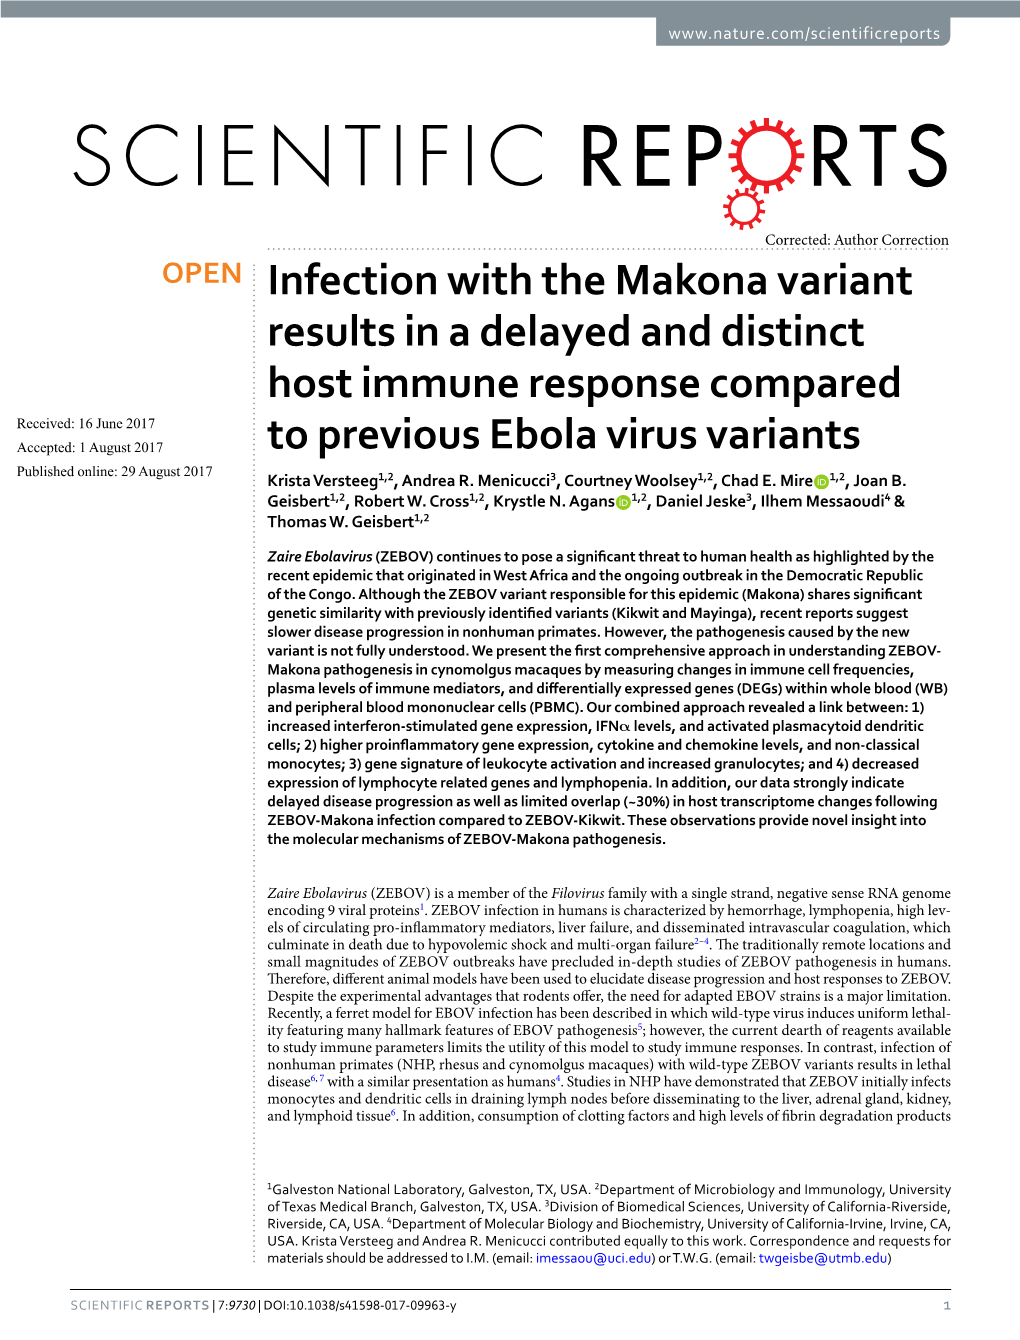 Infection with the Makona Variant Results in a Delayed and Distinct